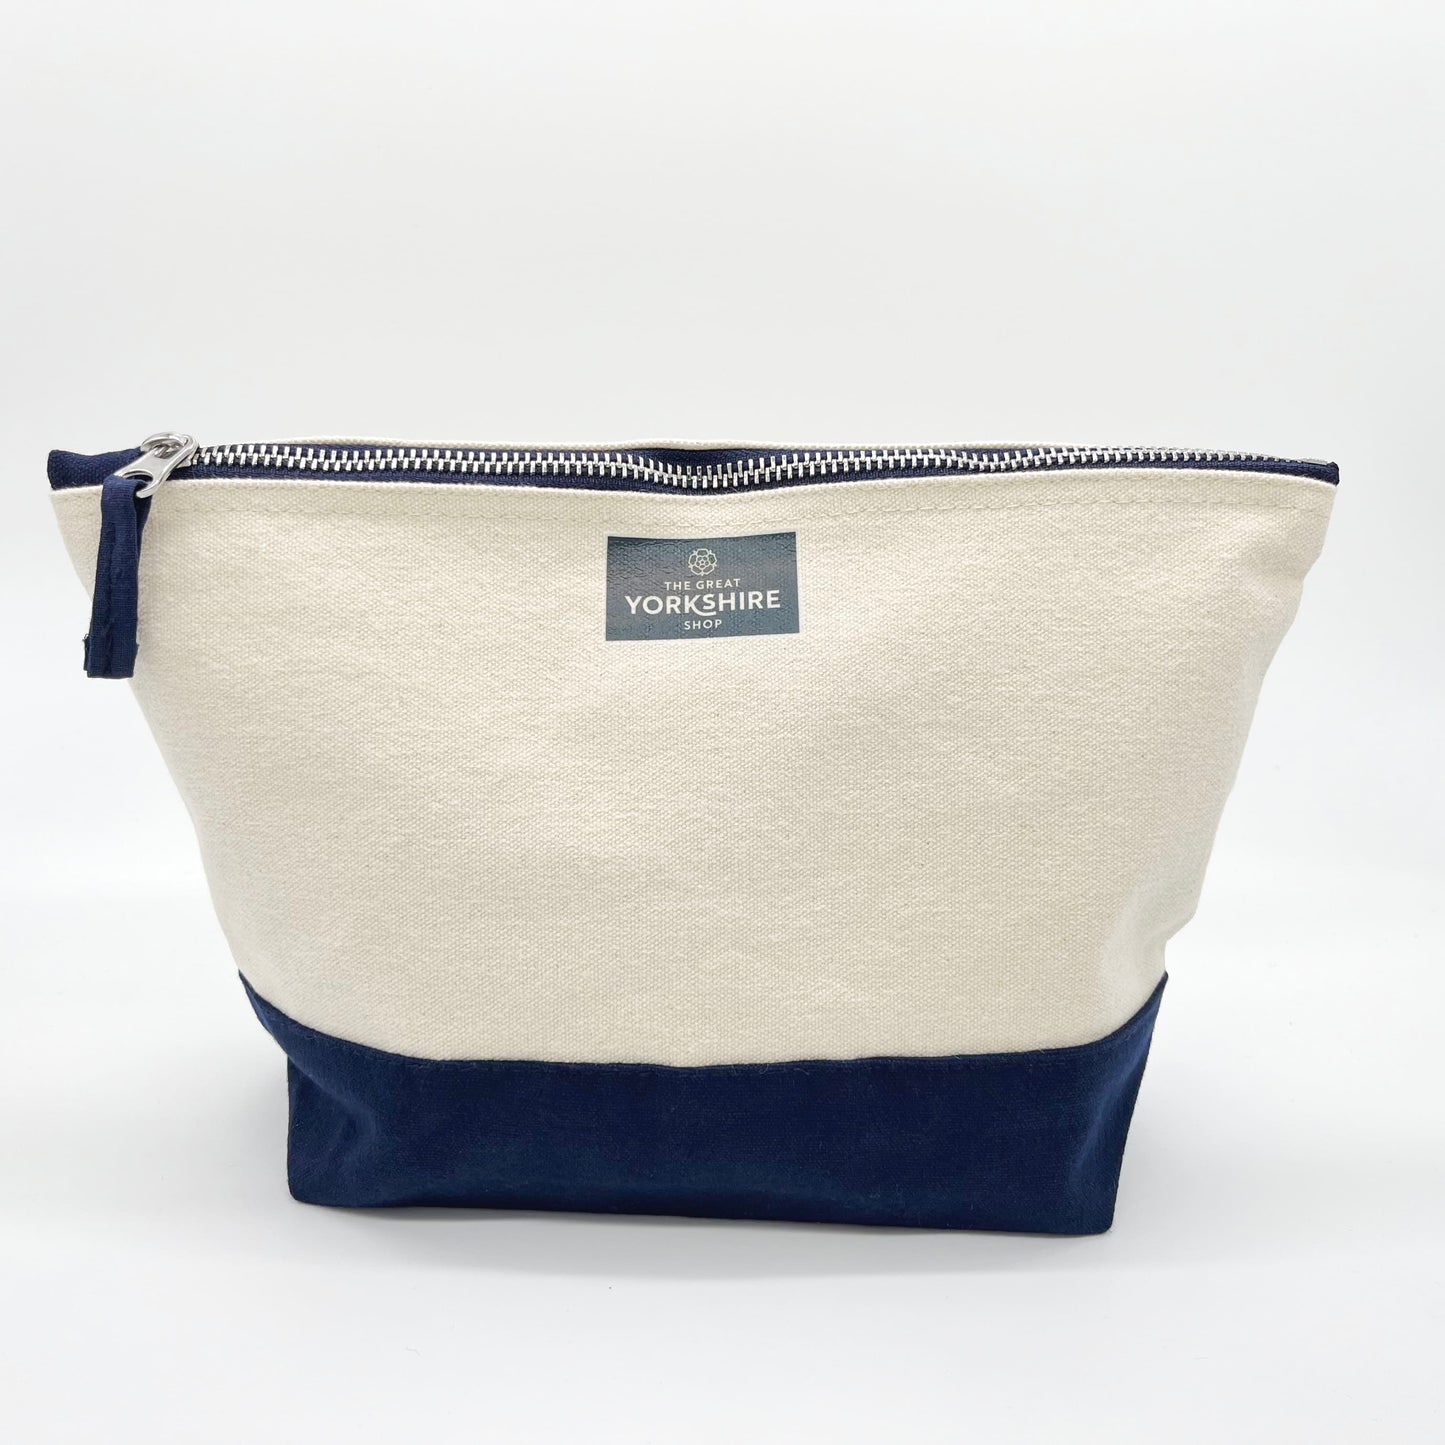 The Great Yorkshire Shop Unisex Toiletry Washbag